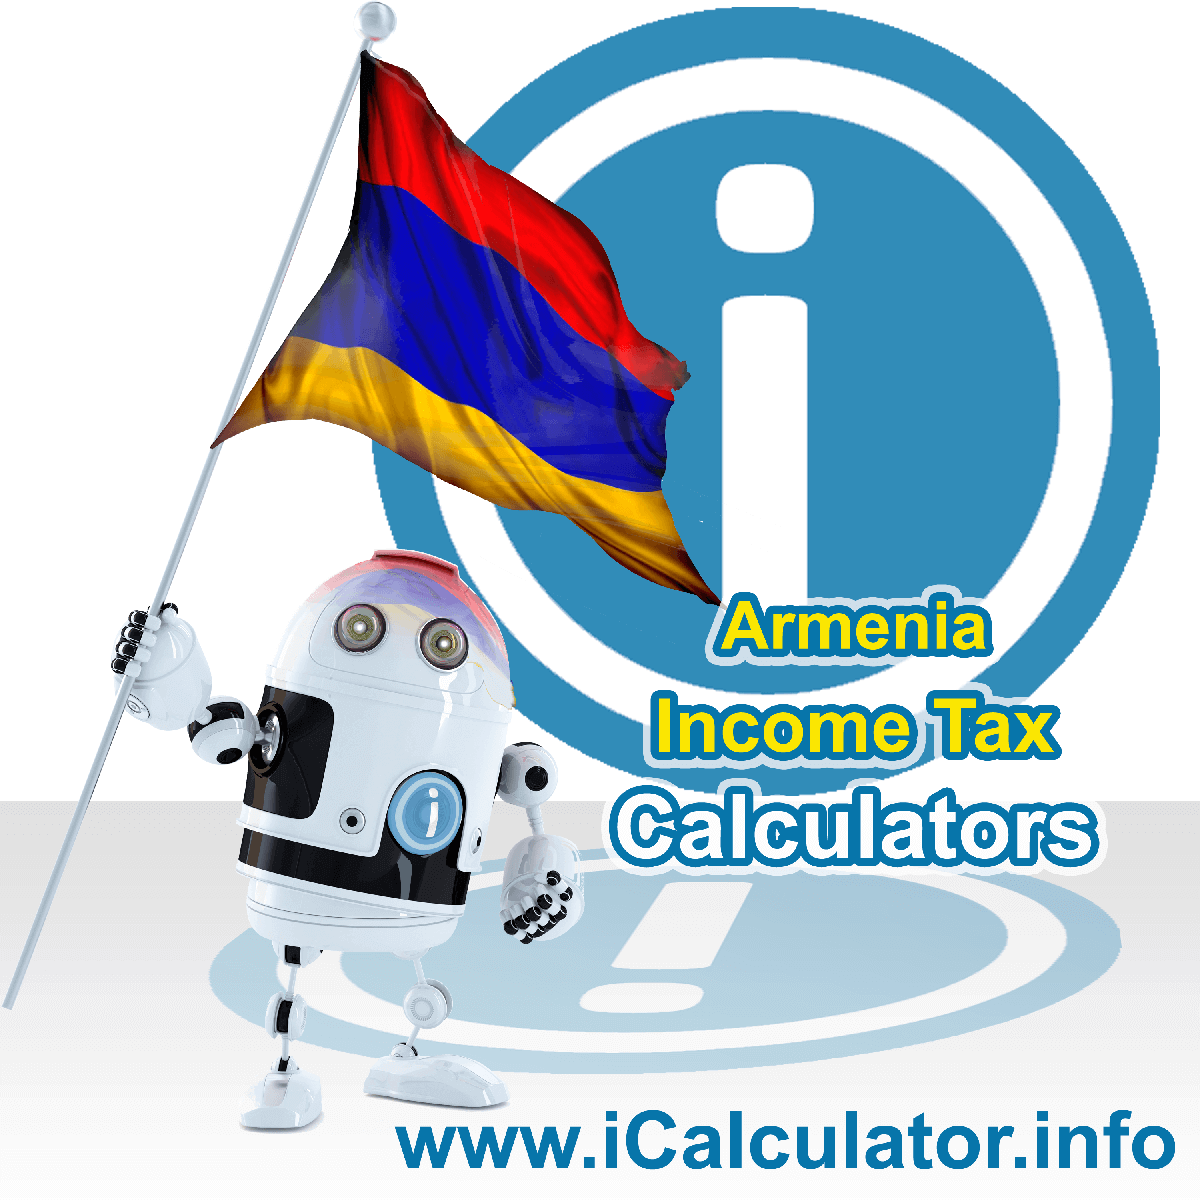 Armenia Income Tax Calculator. This image shows a new employer in Armenia calculating the annual payroll costs based on multiple payroll payments in one year in Armenia using the Armenia income tax calculator to understand their payroll costs in Armenia in 2023